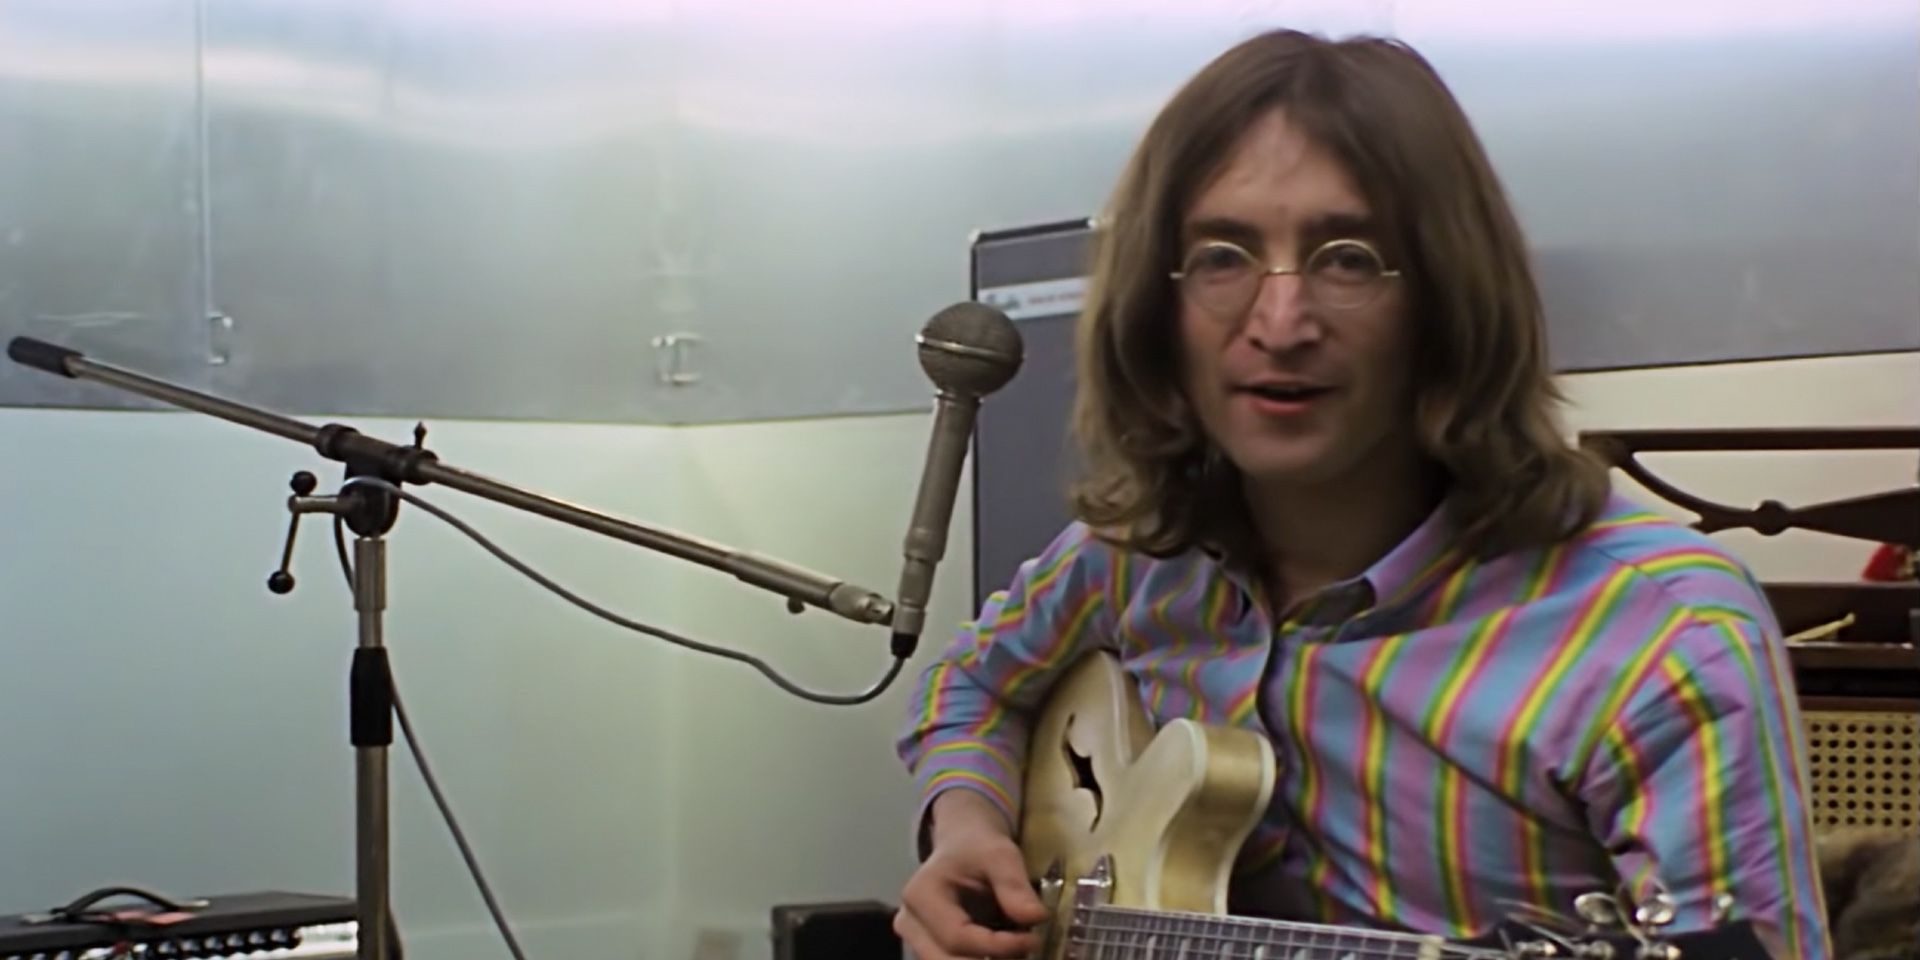 John Lennon plays the guitar in The Beatles: Get Back.